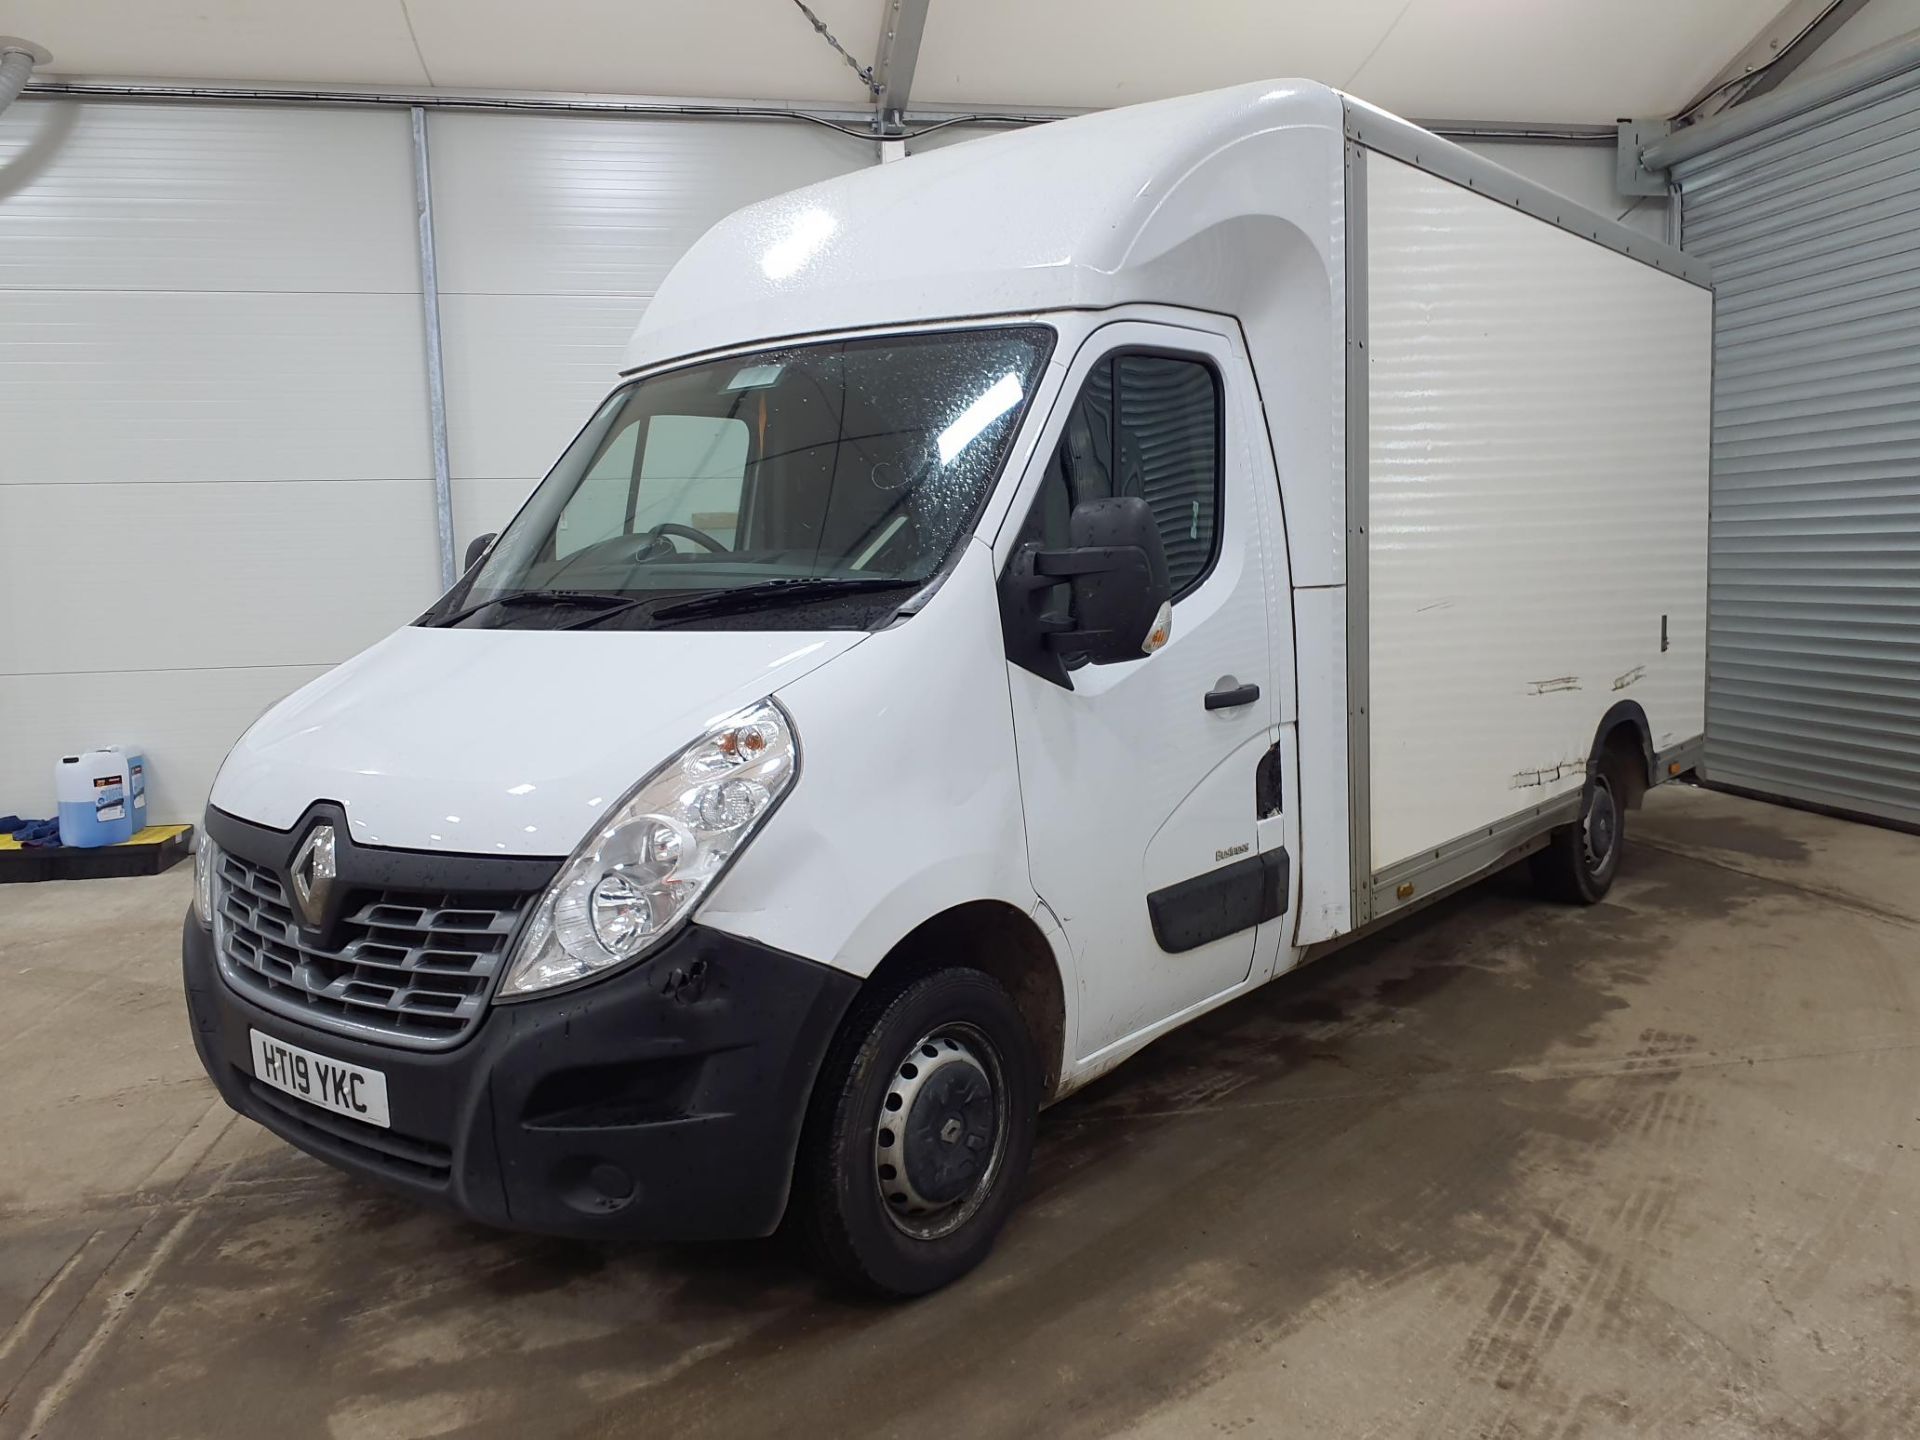 (ON SALE) RENAULT MASTER LL35 *LWB - LOW LOADER / LUTON BOX* (2019 - EURO 6) 2.3 DCI - (1 OWNER) - Image 2 of 6